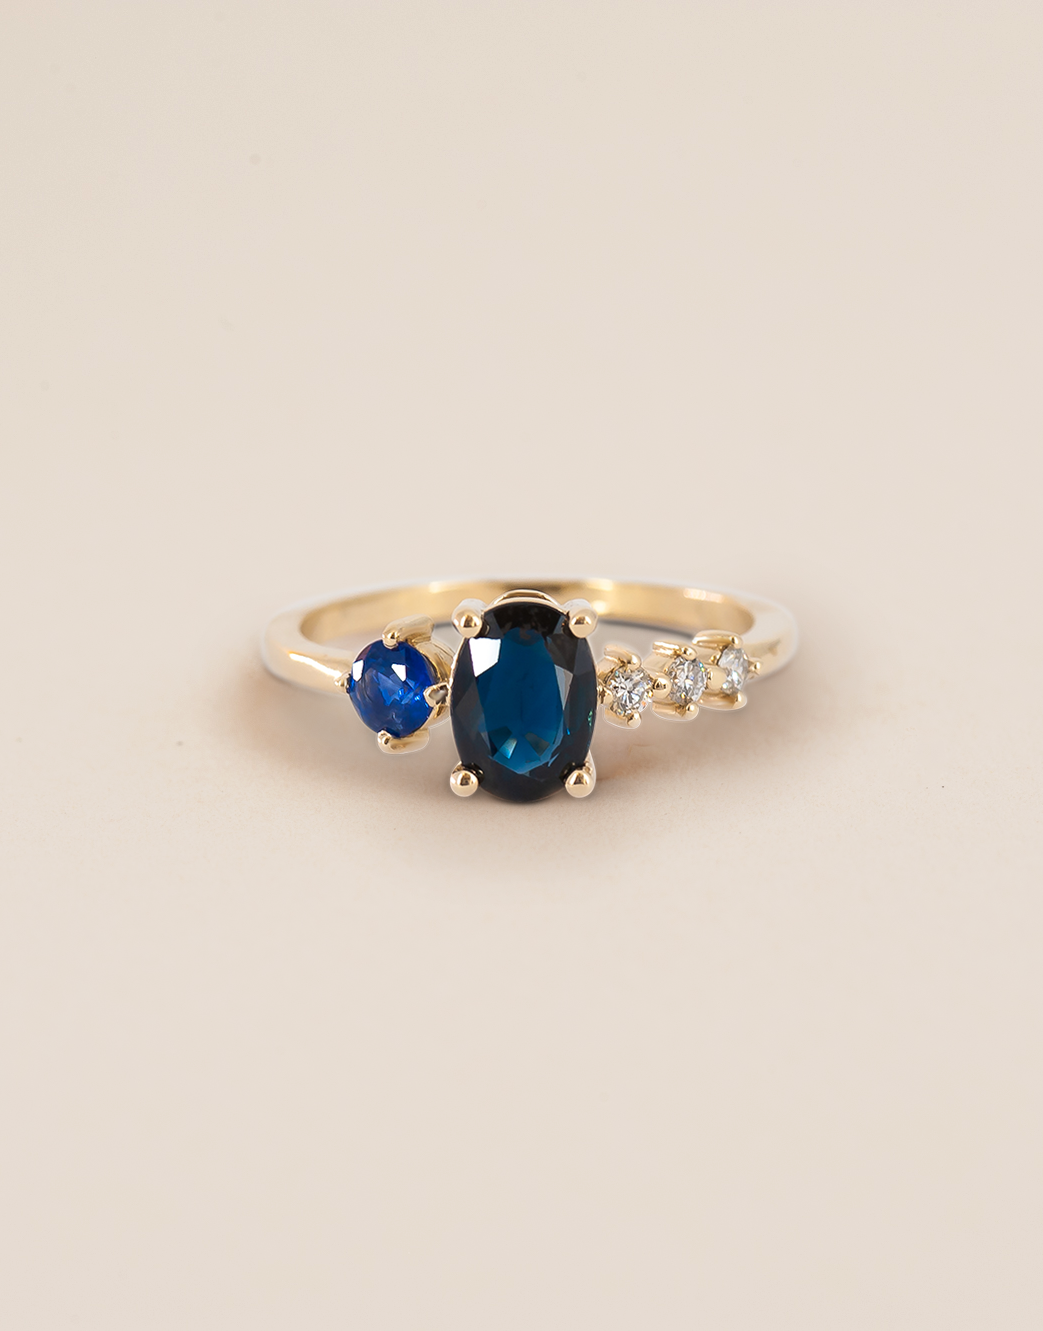 Erin's asymmetrical sapphire ring with an additional round sapphire and white diamonds.